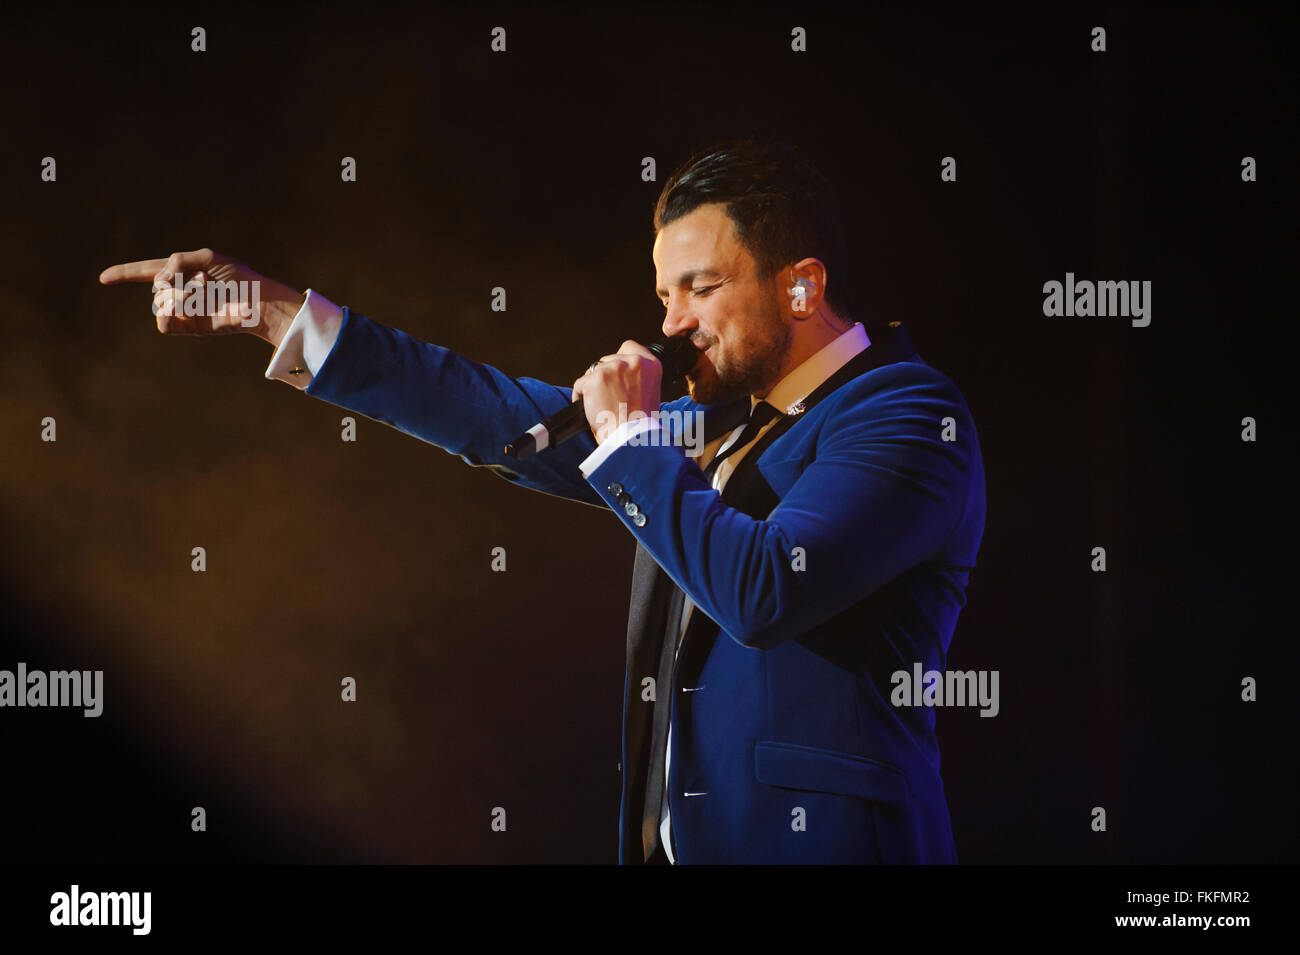 Liverpool, UK. 8th March 2016. Singer, Peter Andre, performs during his ‘Come Swing With Me’ tour at the Echo Arena, Liverpool. © Paul Warburton Stock Photo